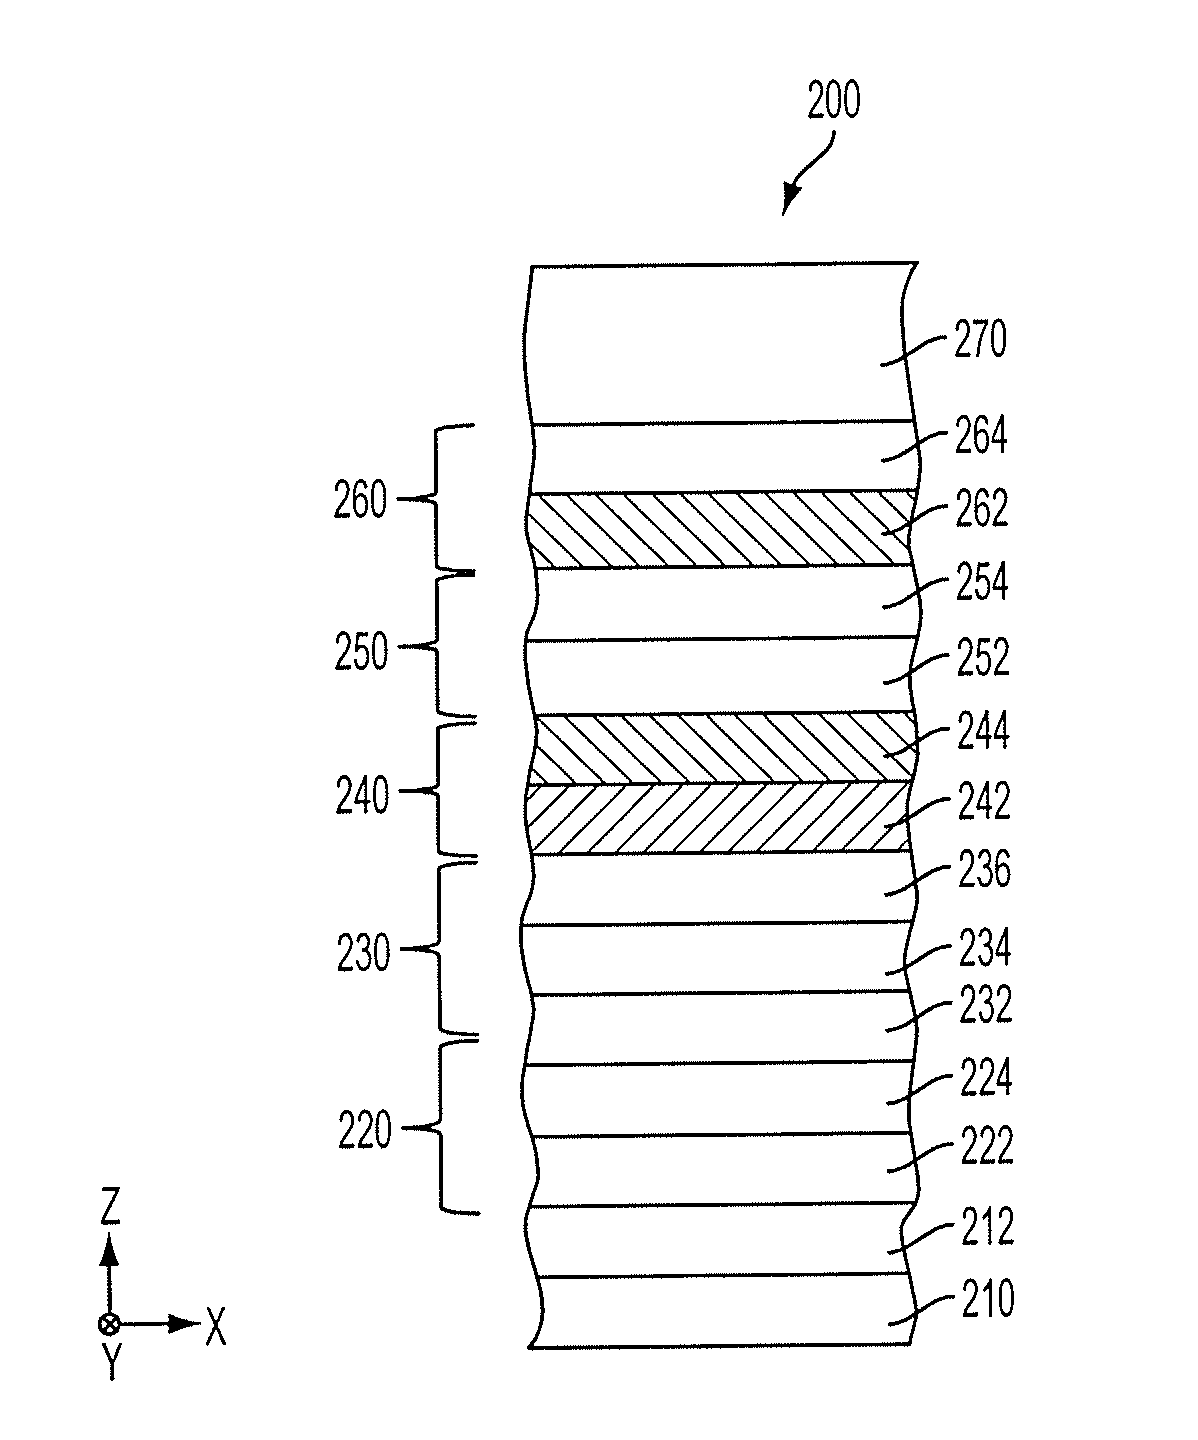 Magnetic tunnel junction structure for MRAM device